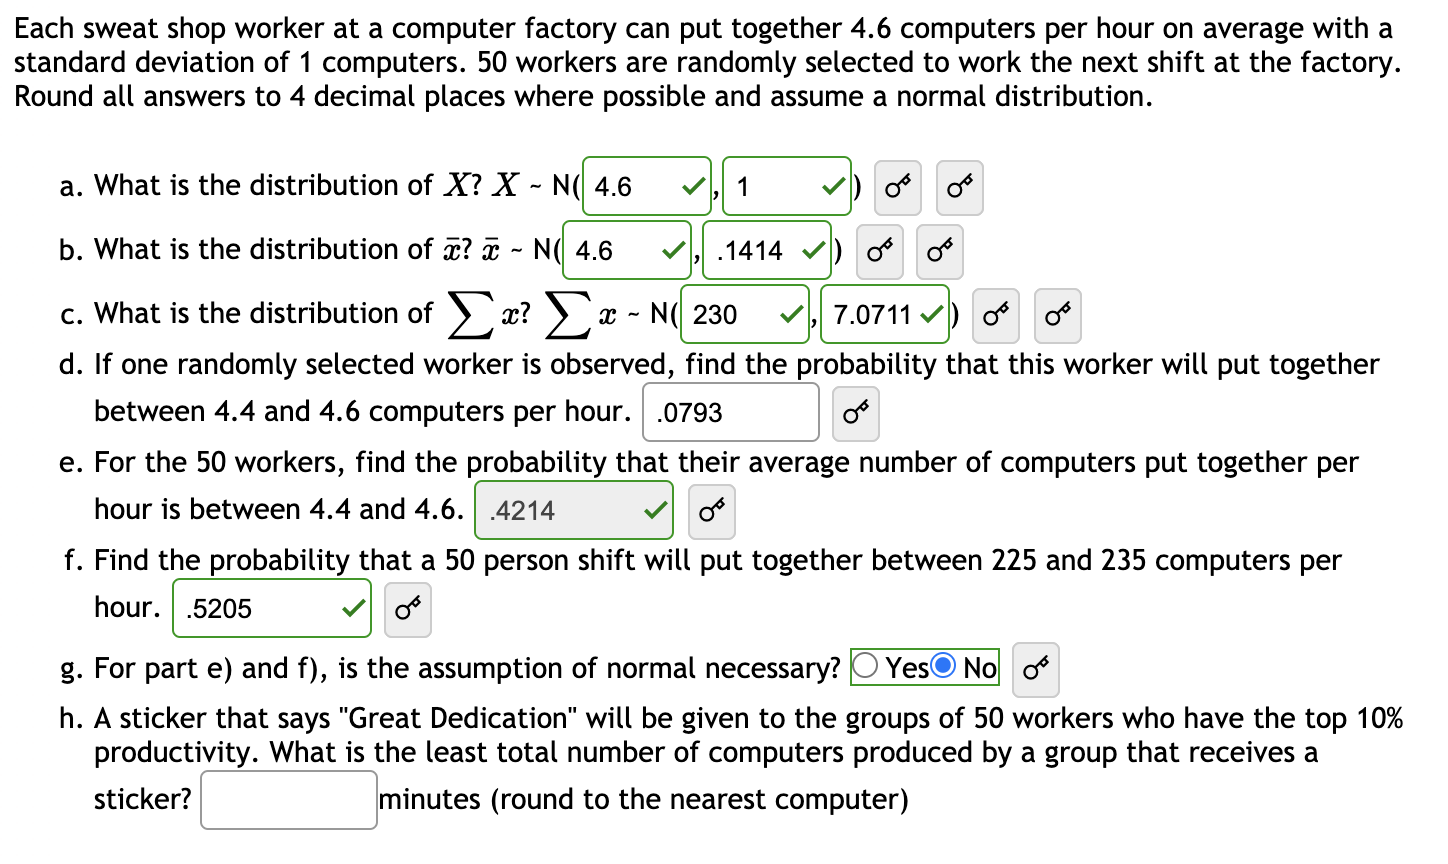 Each sweat shop worker at a computer factory can put together 4.6 computers per hour on average with a
standard deviation of 1 computers. 50 workers are randomly selected to work the next shift at the factory.
Round all answers to 4 decimal places where possible and assume a normal distribution.
a. What is the distribution of X? X - N( 4.6
1
b. What is the distribution of x? ¤ - N( 4.6
1414
o o
c. What is the distribution of >x? ) x - N( 230
7.0711 v) o
d. If one randomly selected worker is observed, find the probability that this worker will put together
between 4.4 and 4.6 computers per hour. .0793
e. For the 50 workers, find the probability that their average number of computers put together per
hour is between 4.4 and 4.6. .4214
f. Find the probability that a 50 person shift will put together between 225 and 235 computers per
hour.
.5205
g. For part e) and f), is the assumption of normal necessary?
YesO No o
h. A sticker that says "Great Dedication" will be given to the groups of 50 workers who have the top 10%
productivity. What is the least total number of computers produced by a group that receives a
sticker?
minutes (round to the nearest computer)
